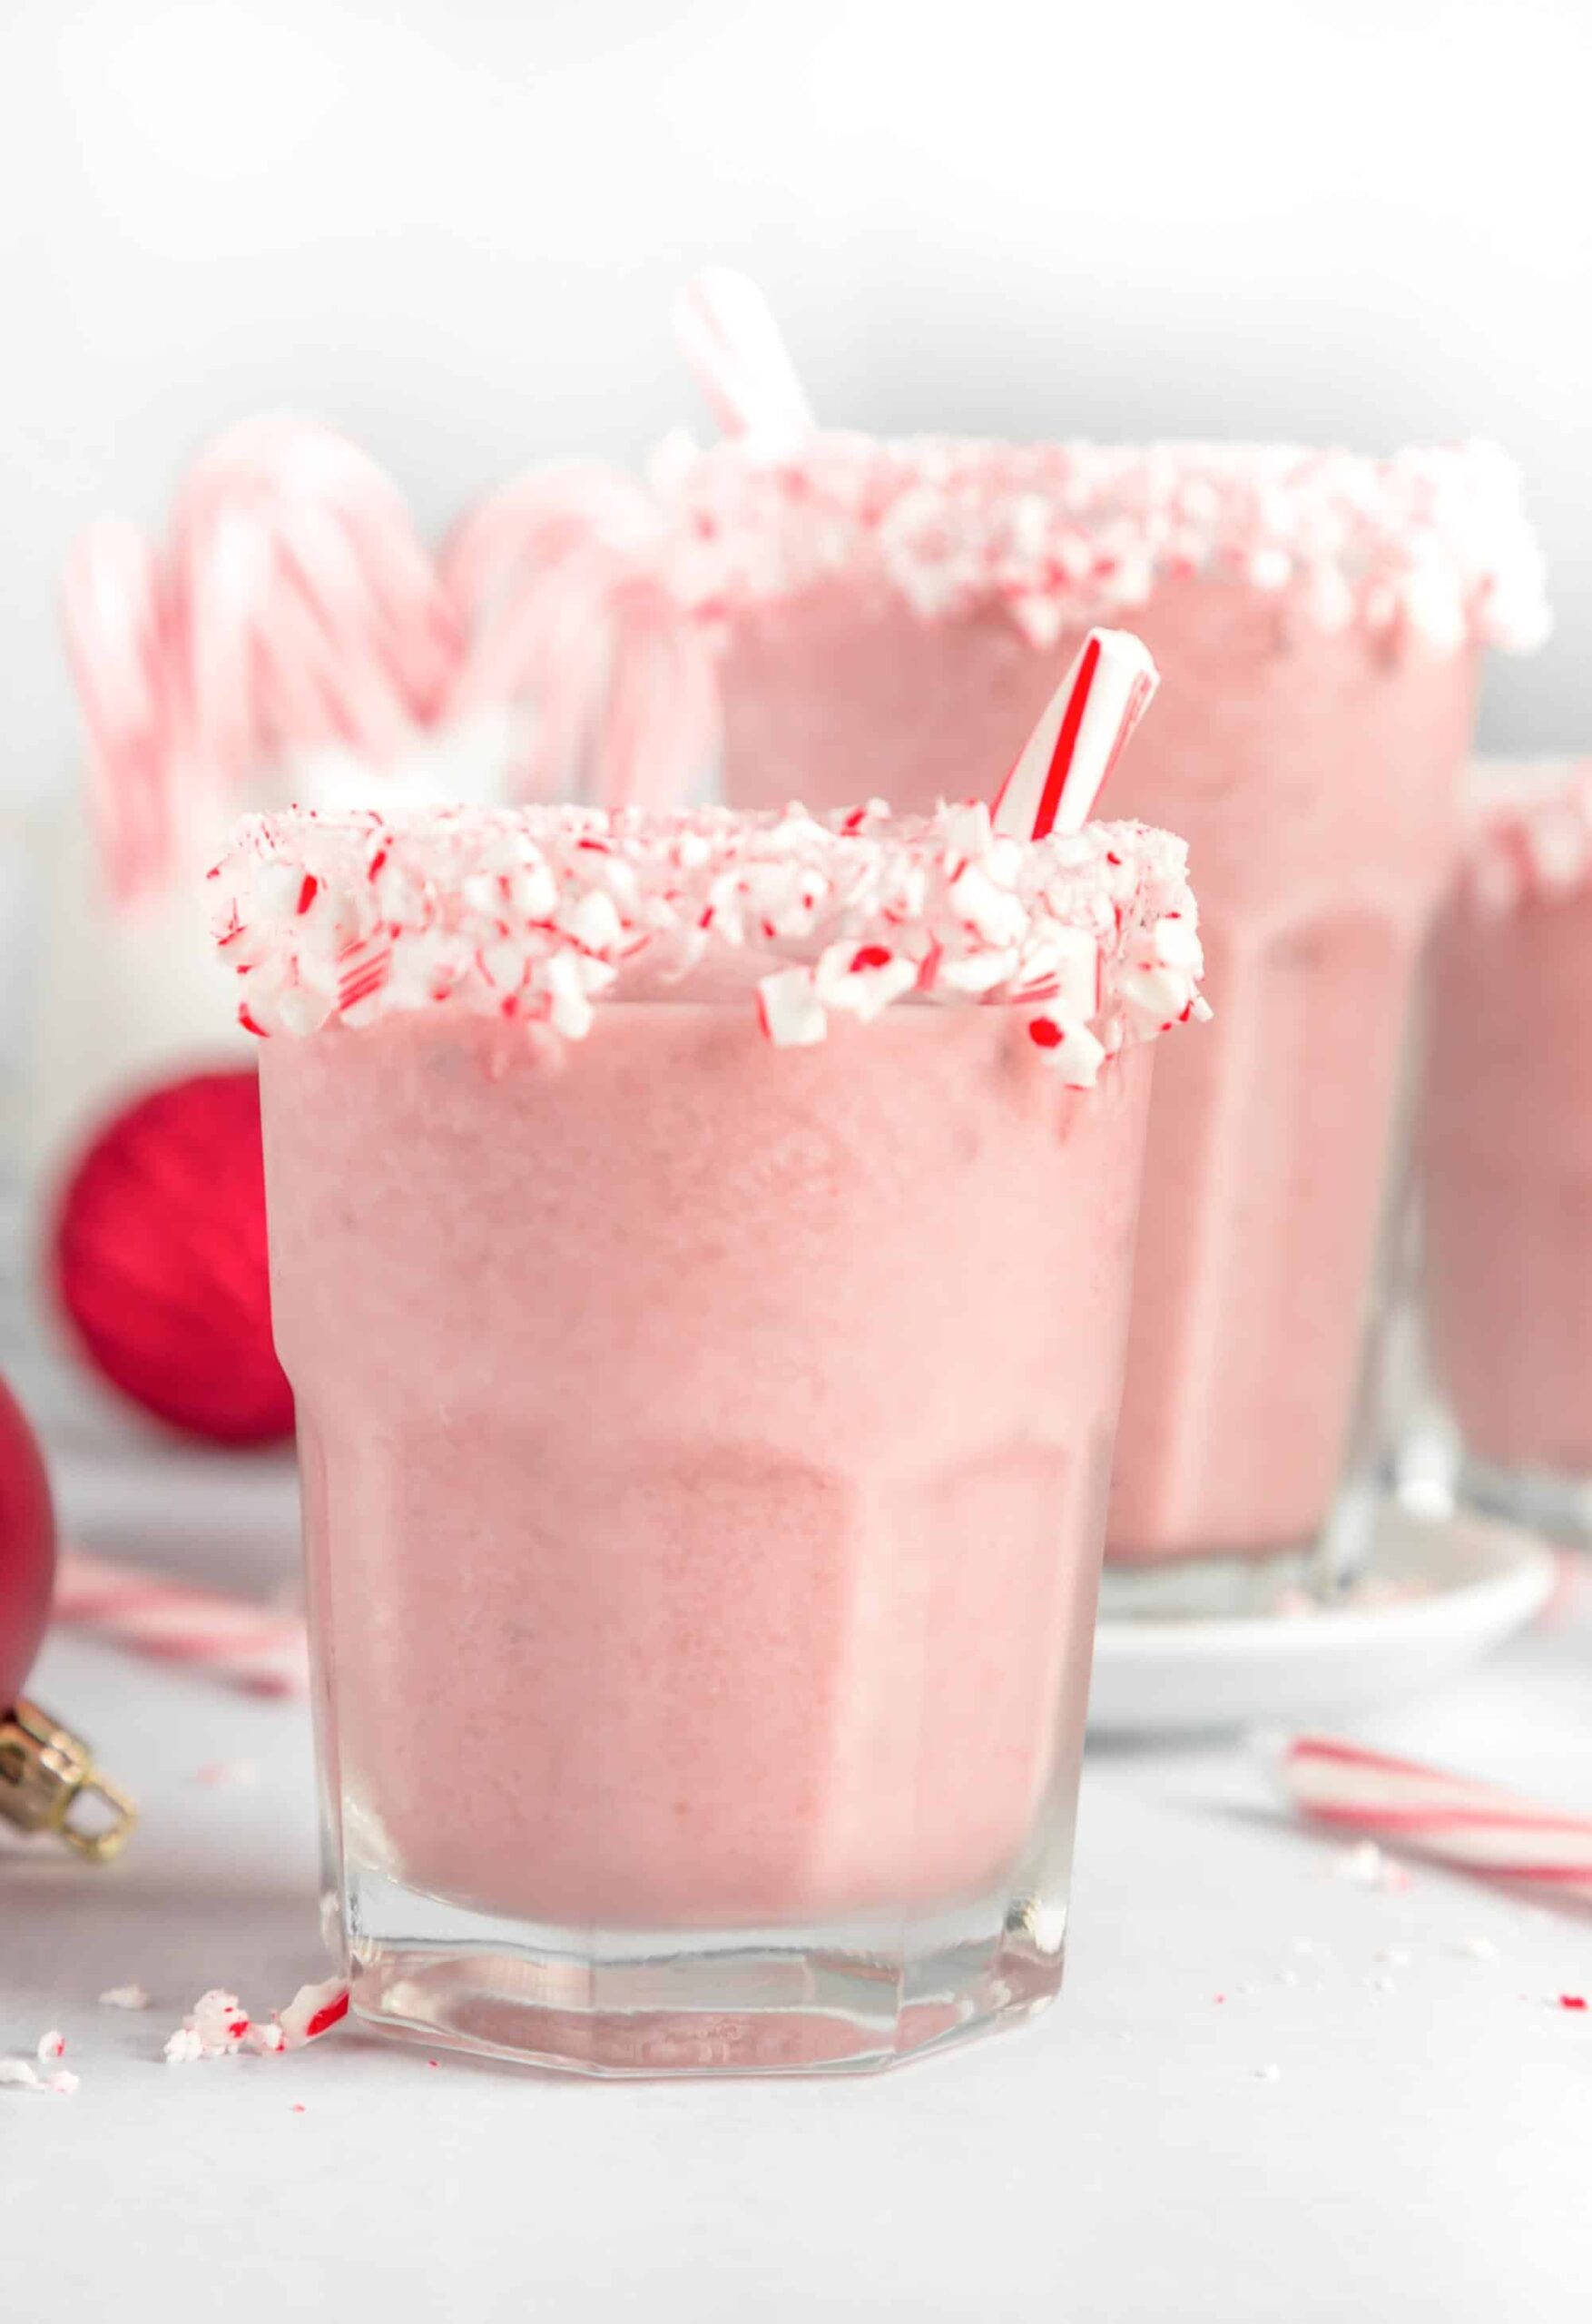 Healthy Pink Peppermint Candy Cane Smoothie Recipe for the Holidays